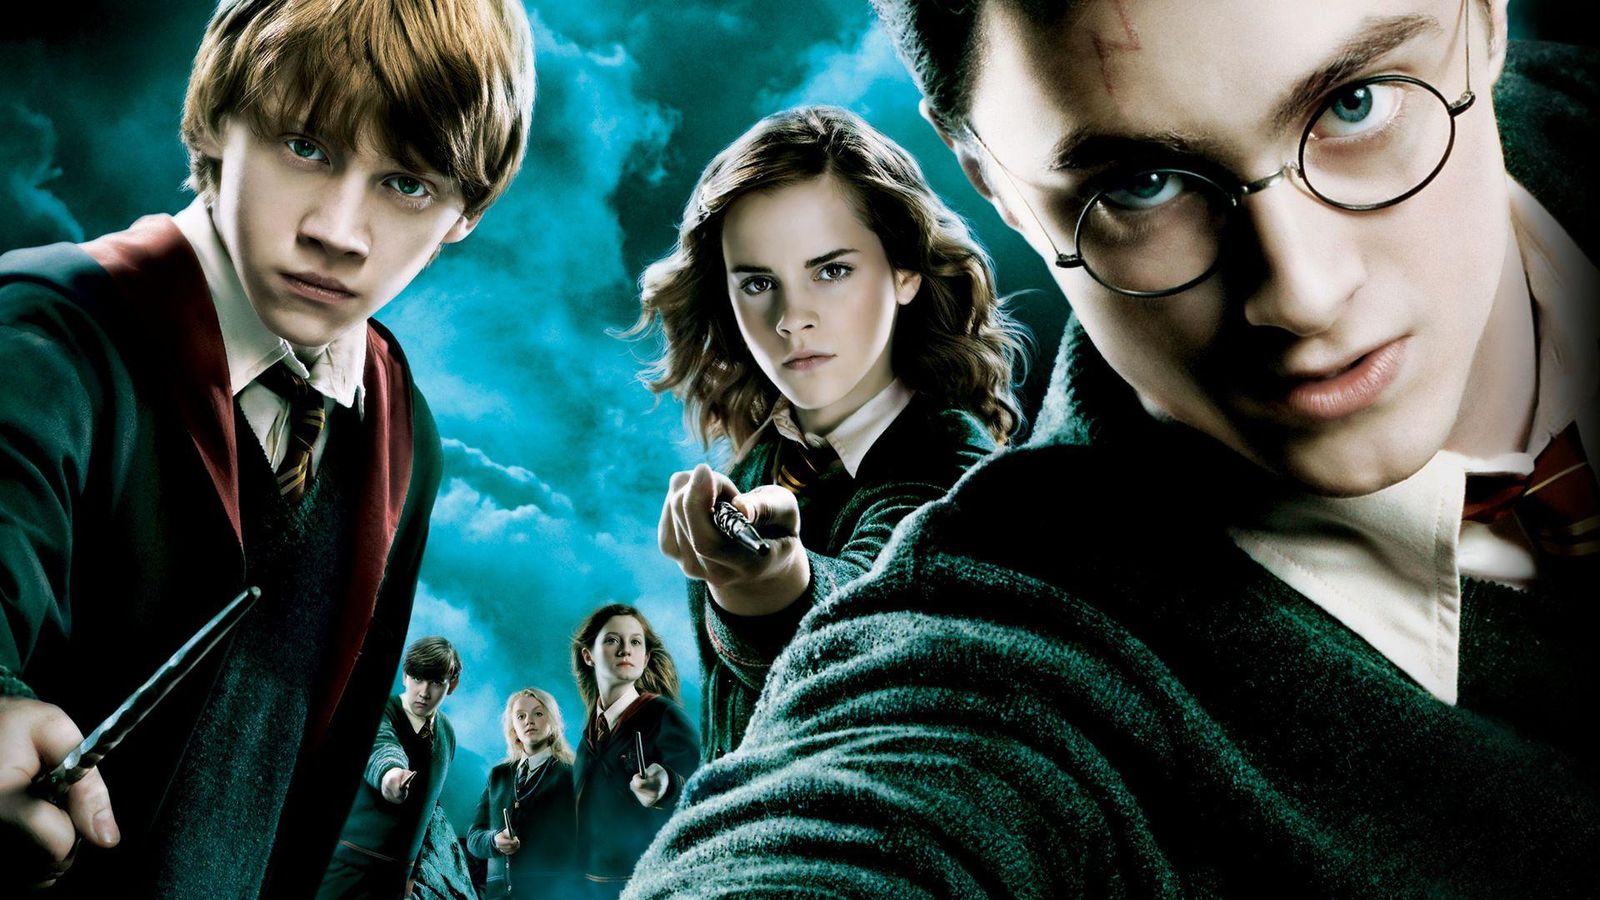 Harry Potter, Hermione Granger, and Ron Weasley are front-and-center.